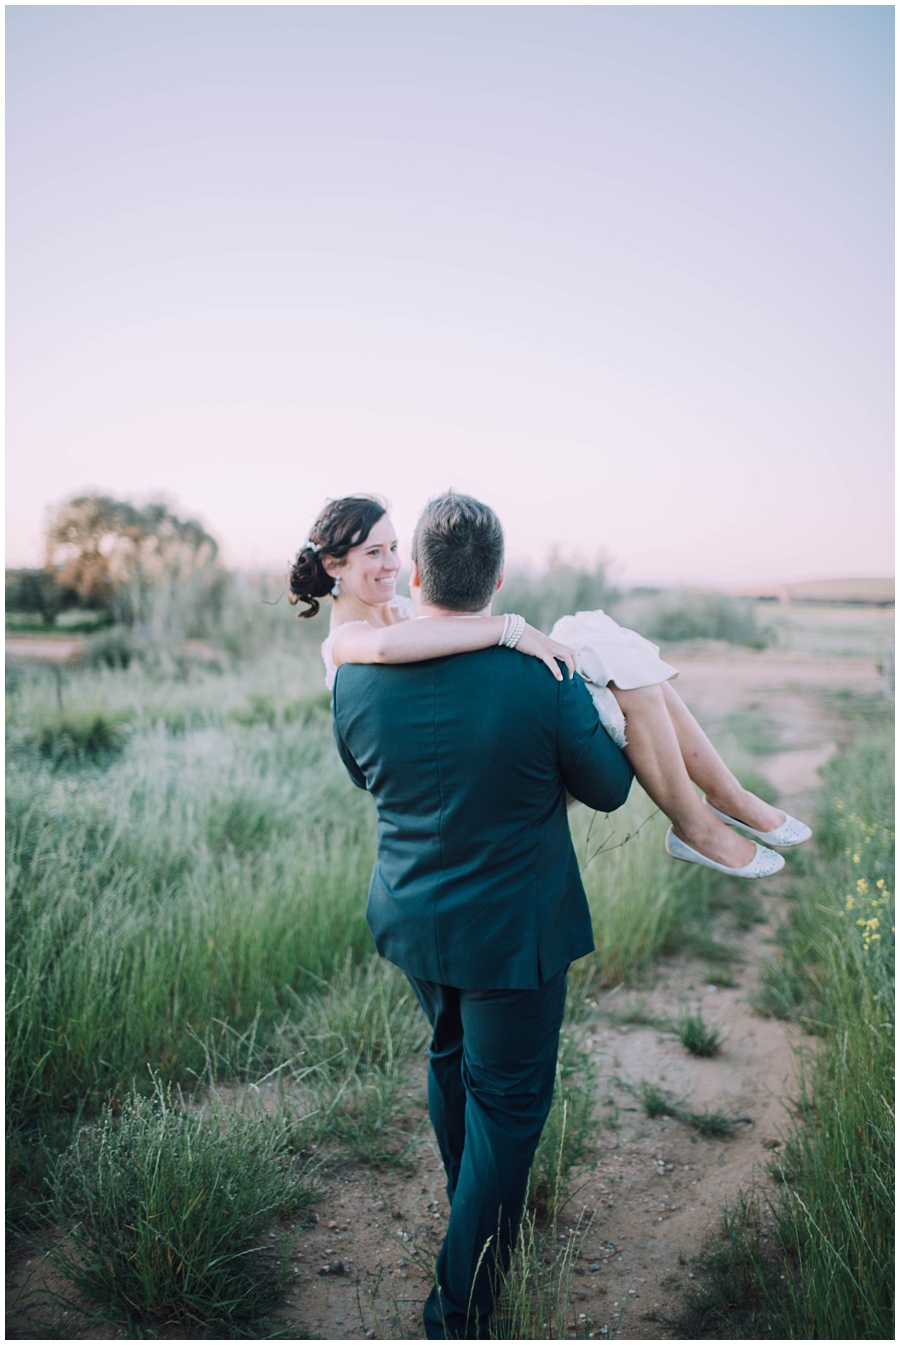 Ronel Kruger Cape Town Wedding and Lifestyle Photographer_8616.jpg